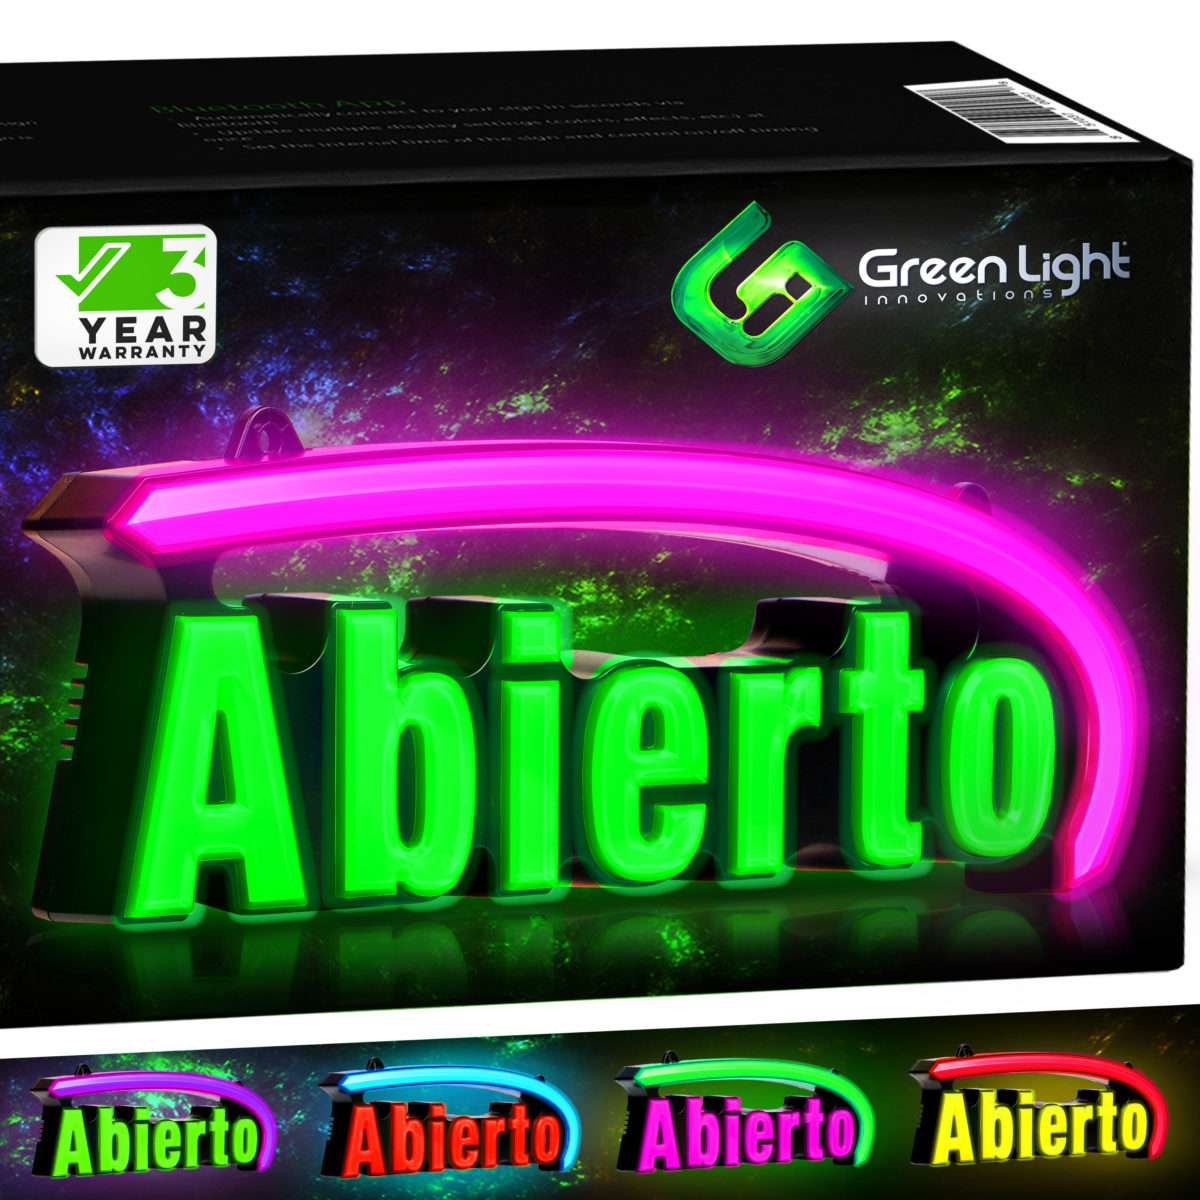 Super Bright LED Abierto Sign – Stand Out with 64 Color Combos to Match Your Brand, – Neon Flash, or Scroll, 18 x 7 inches, Fits In Any Window, Includes Remote Control, Includes Fixings